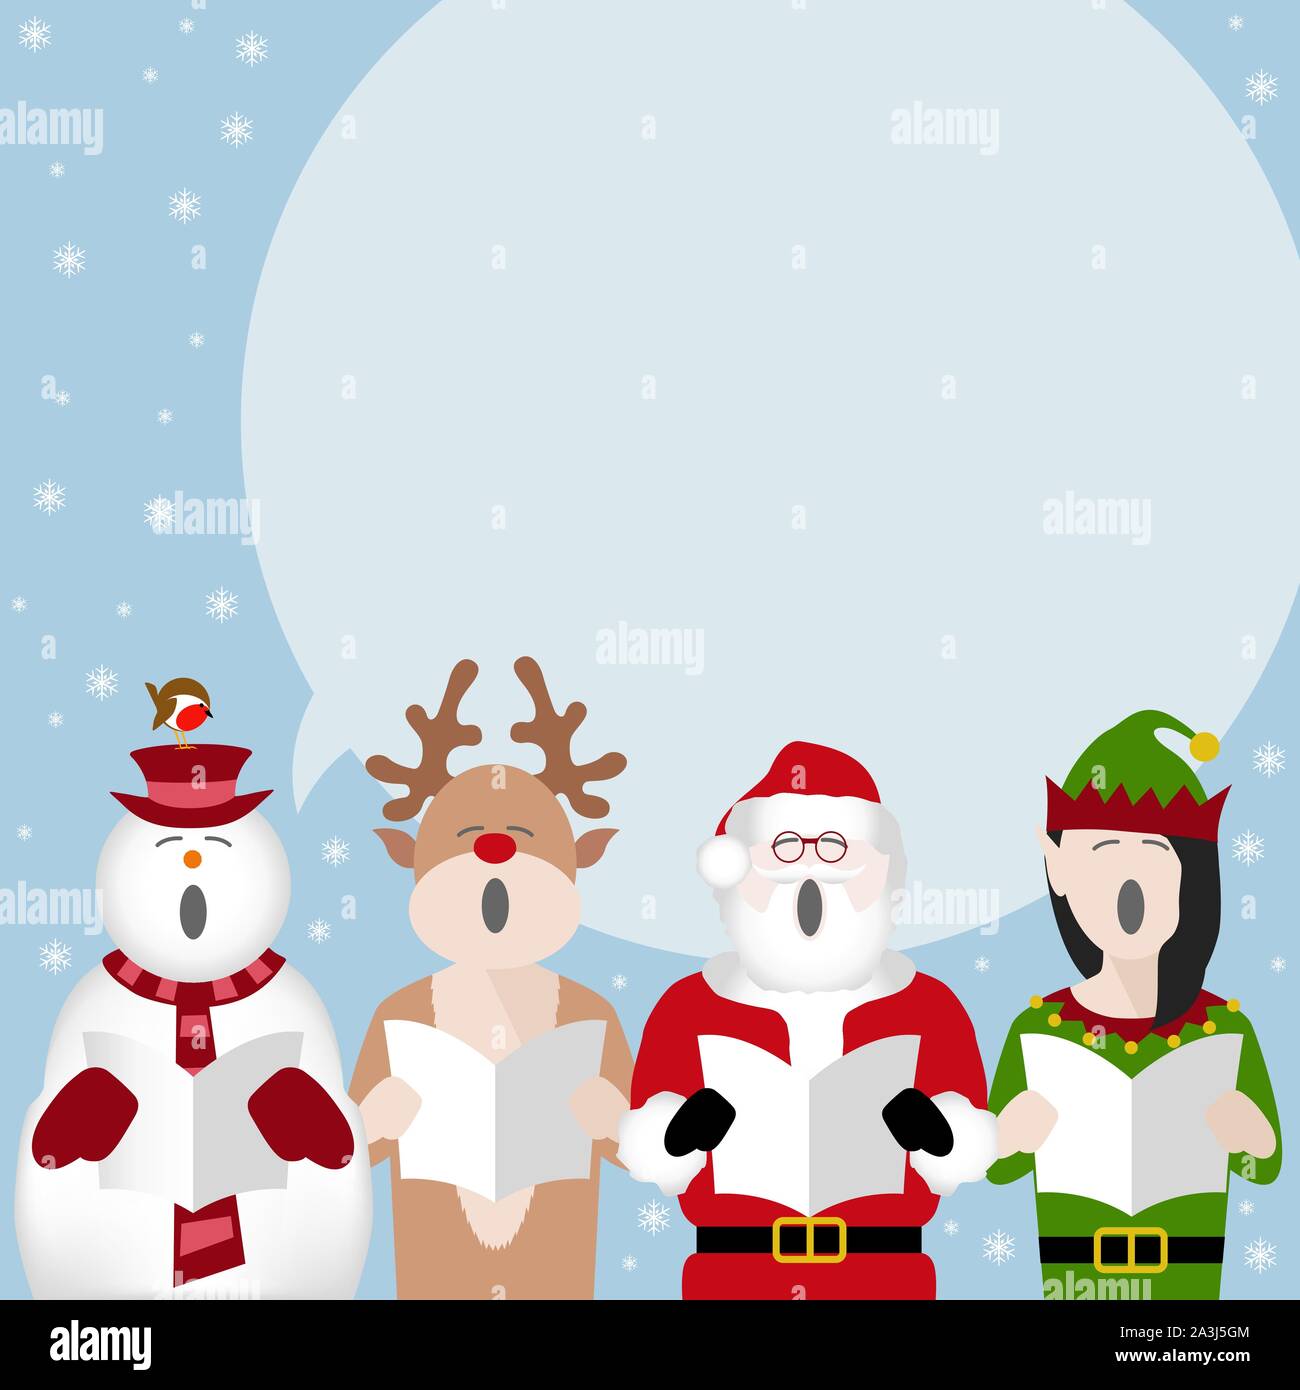 a snowman, reindeer, father christmas and elf singing Christmas carols with room for text Stock Vector